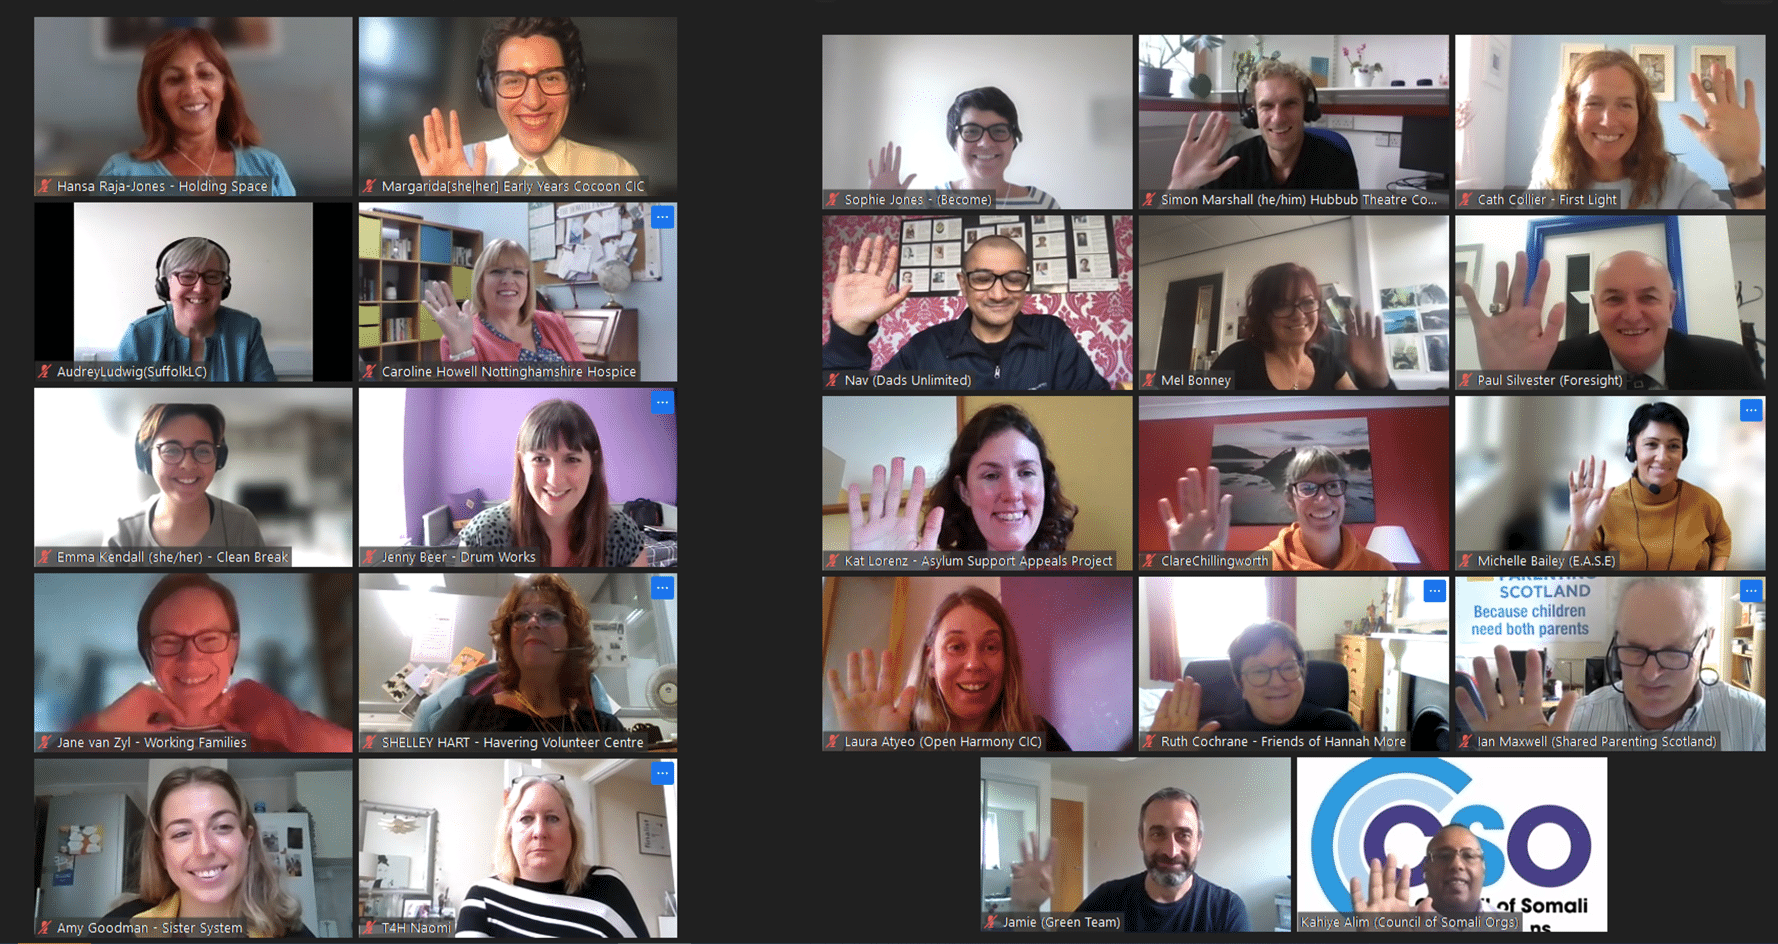 30 charity reviewers on Zoom windows waving.